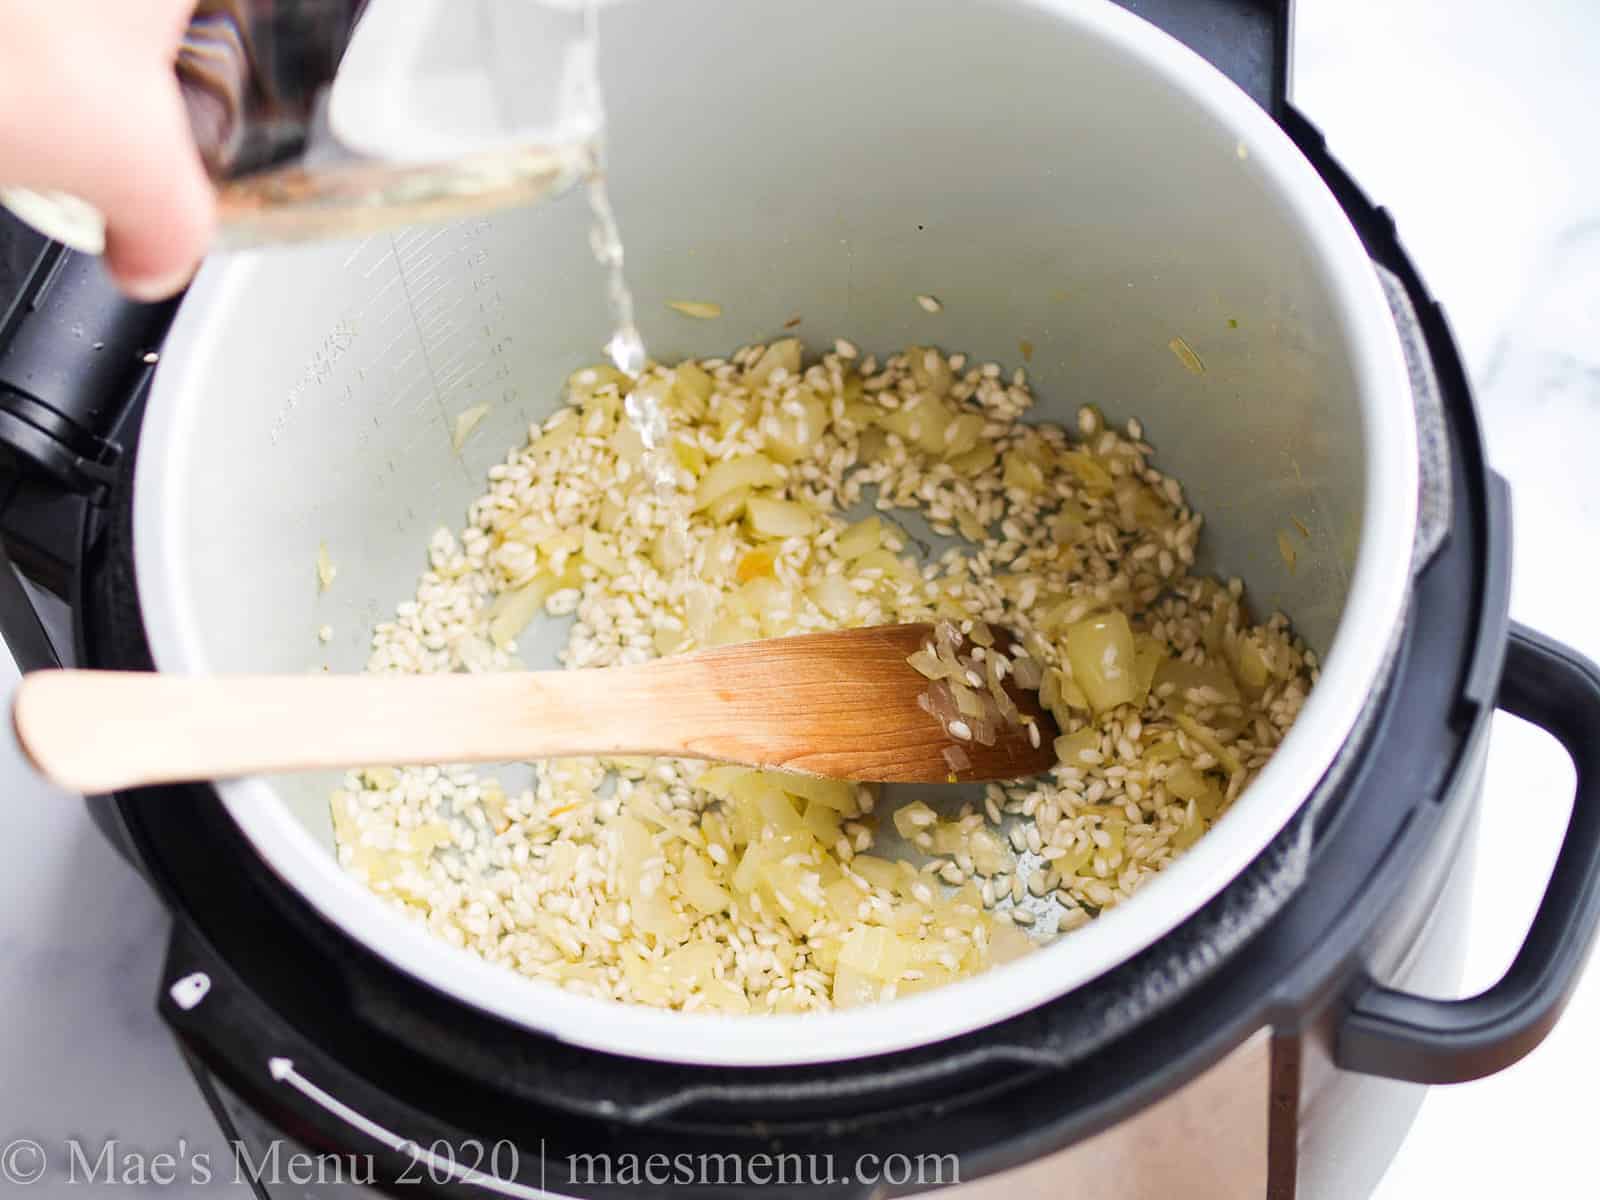 Pouring white wine into the instant pot with the rice